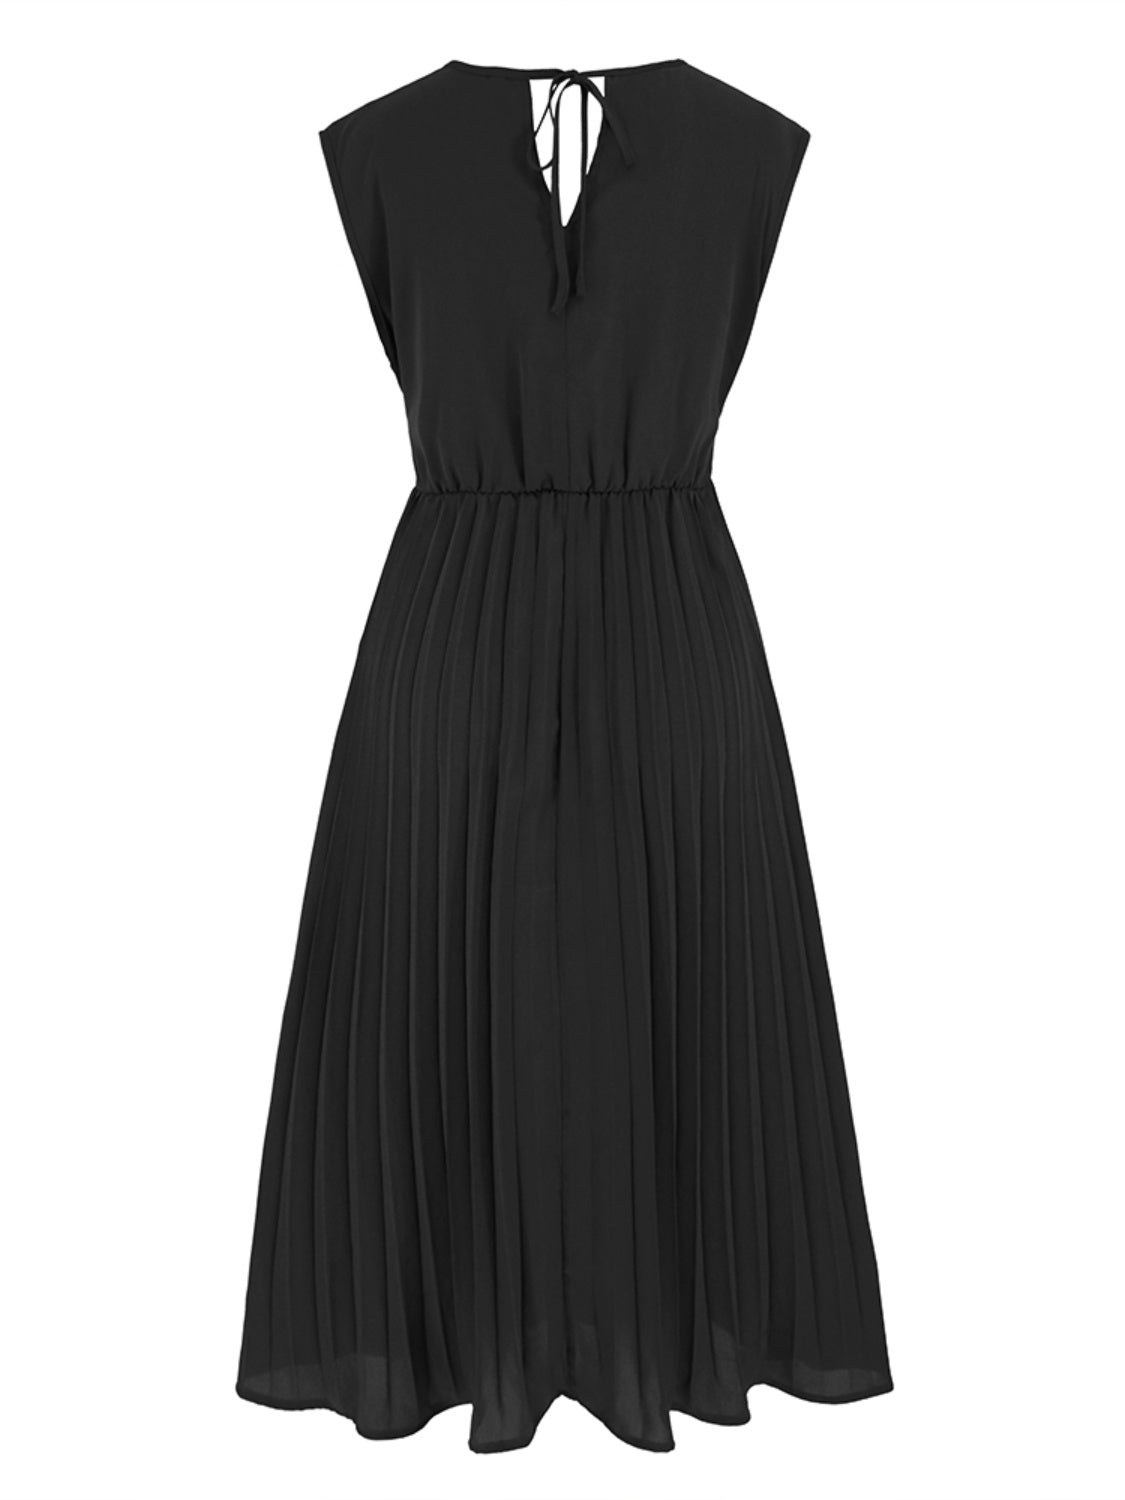 Tied Surplice Pleated Tank Dress  Southern Soul Collectives